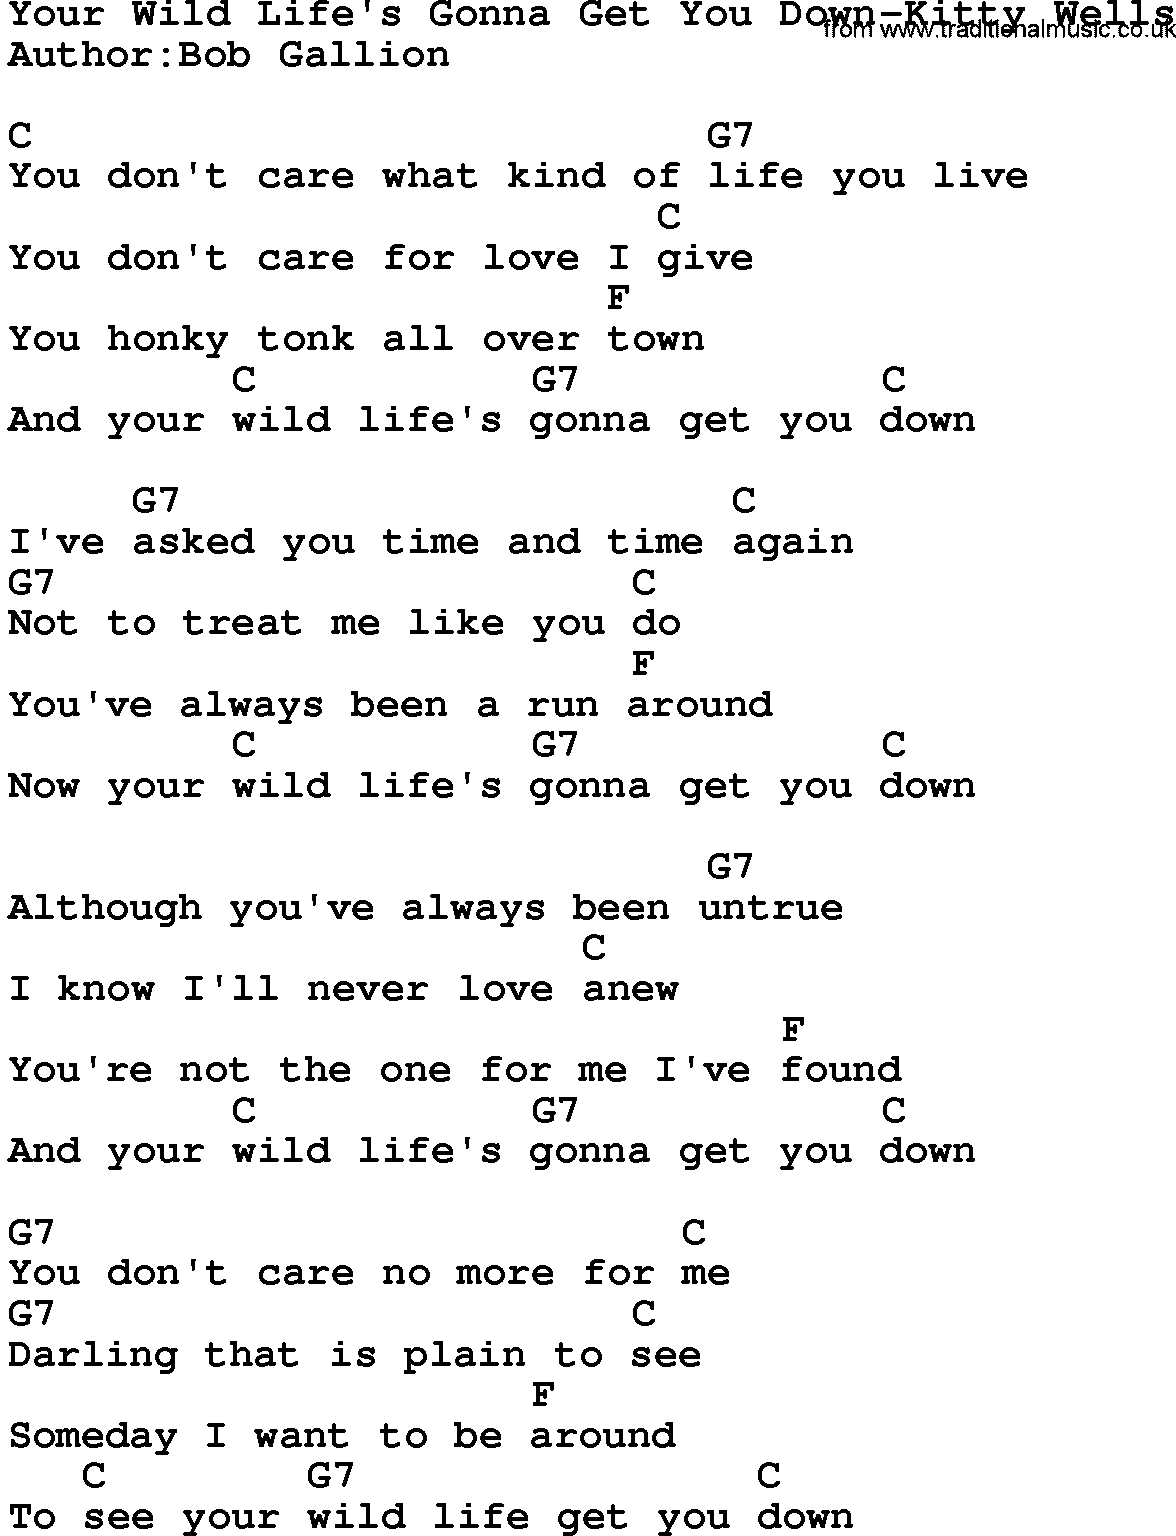 Country music song: Your Wild Life's Gonna Get You Down-Kitty Wells lyrics and chords